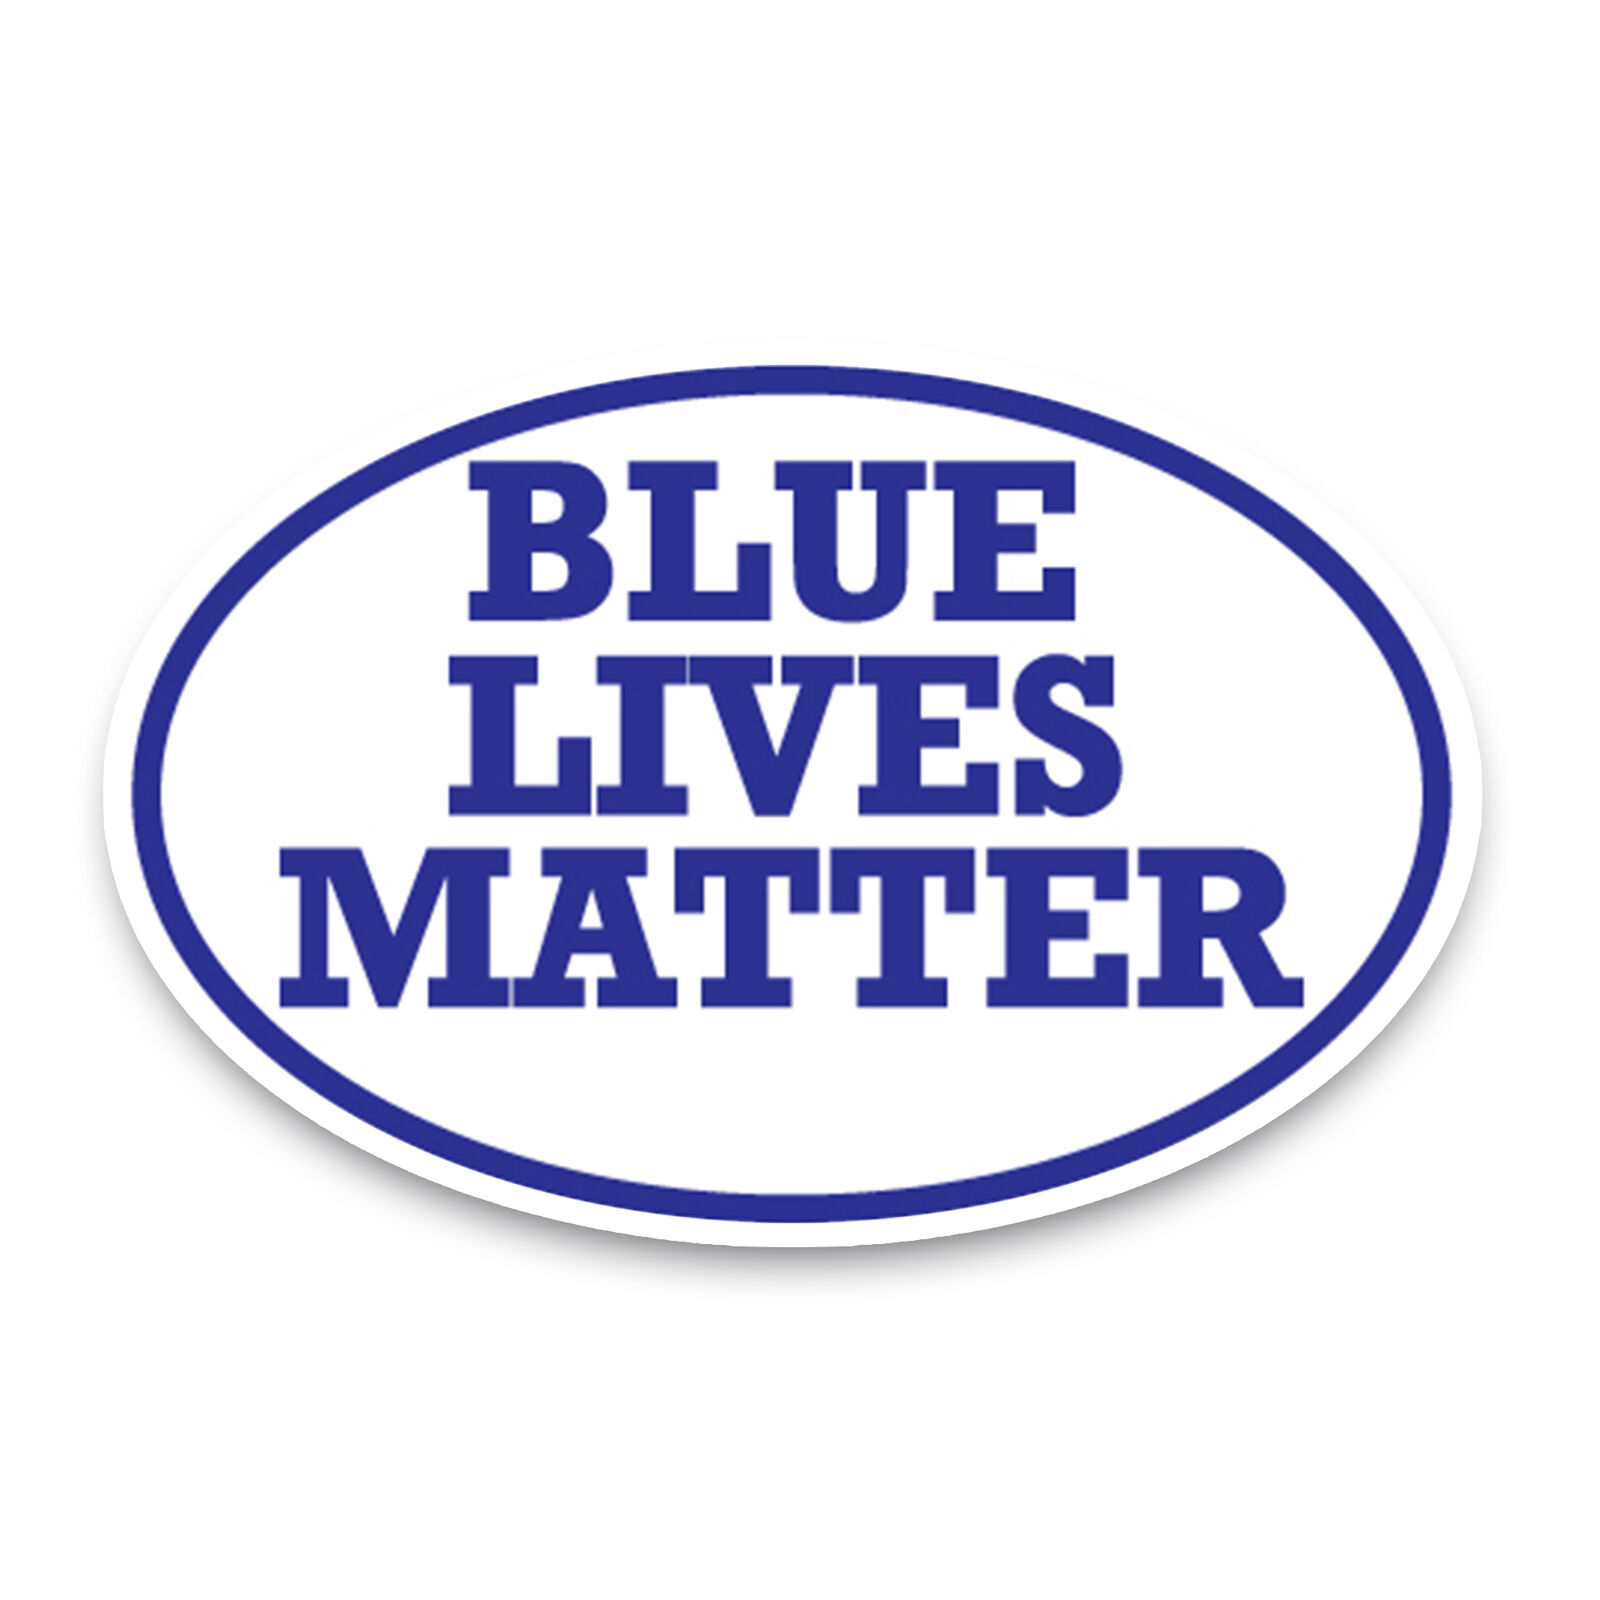 Blue Lives Matter Oval Magnet Decal, 4x6 Inches, Automotive Magnet